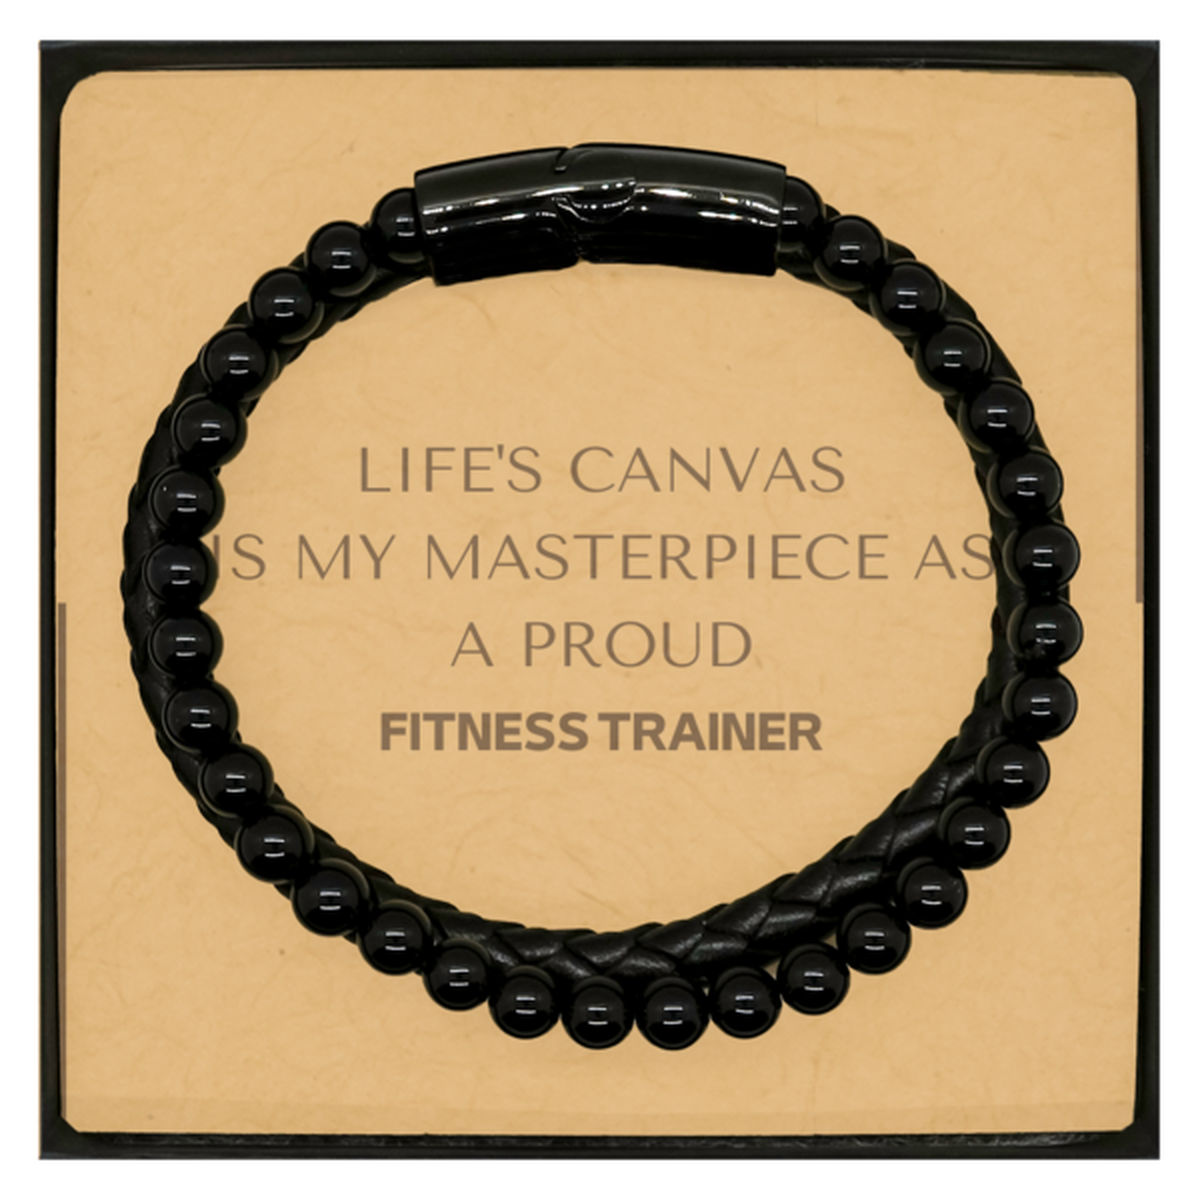 Proud Fitness Trainer Gifts, Life's canvas is my masterpiece, Epic Birthday Christmas Unique Stone Leather Bracelets For Fitness Trainer, Coworkers, Men, Women, Friends